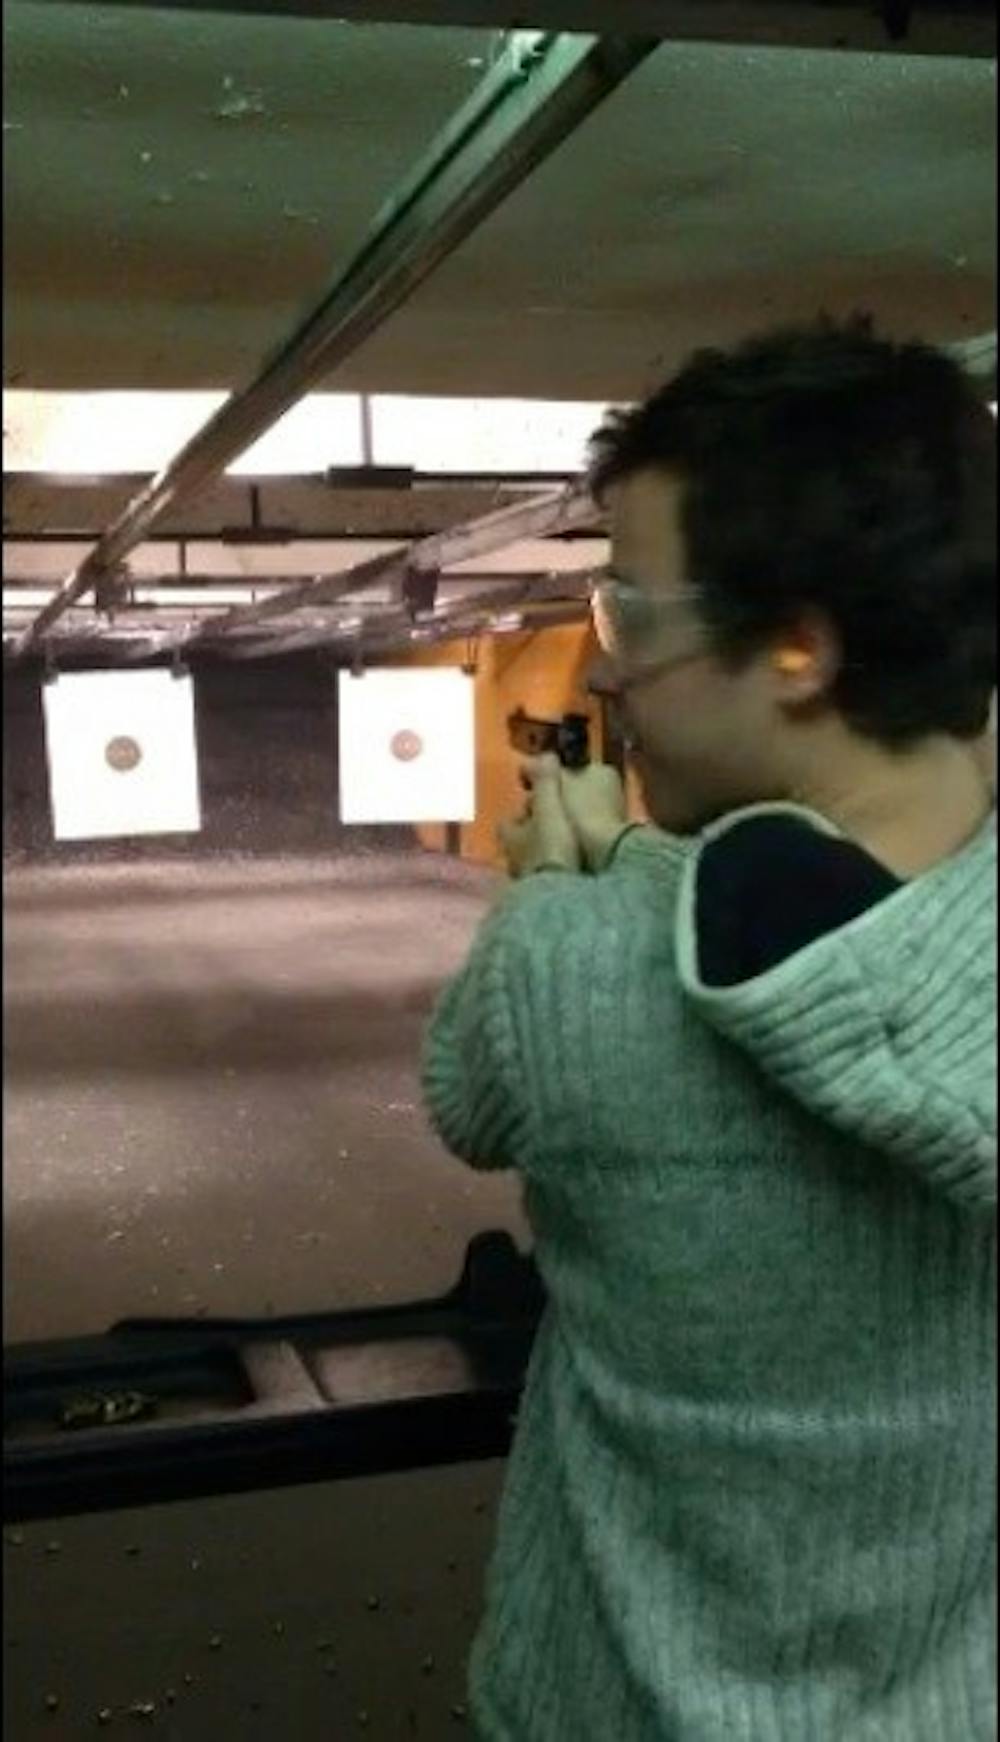 Englishman practices his right to bear arms